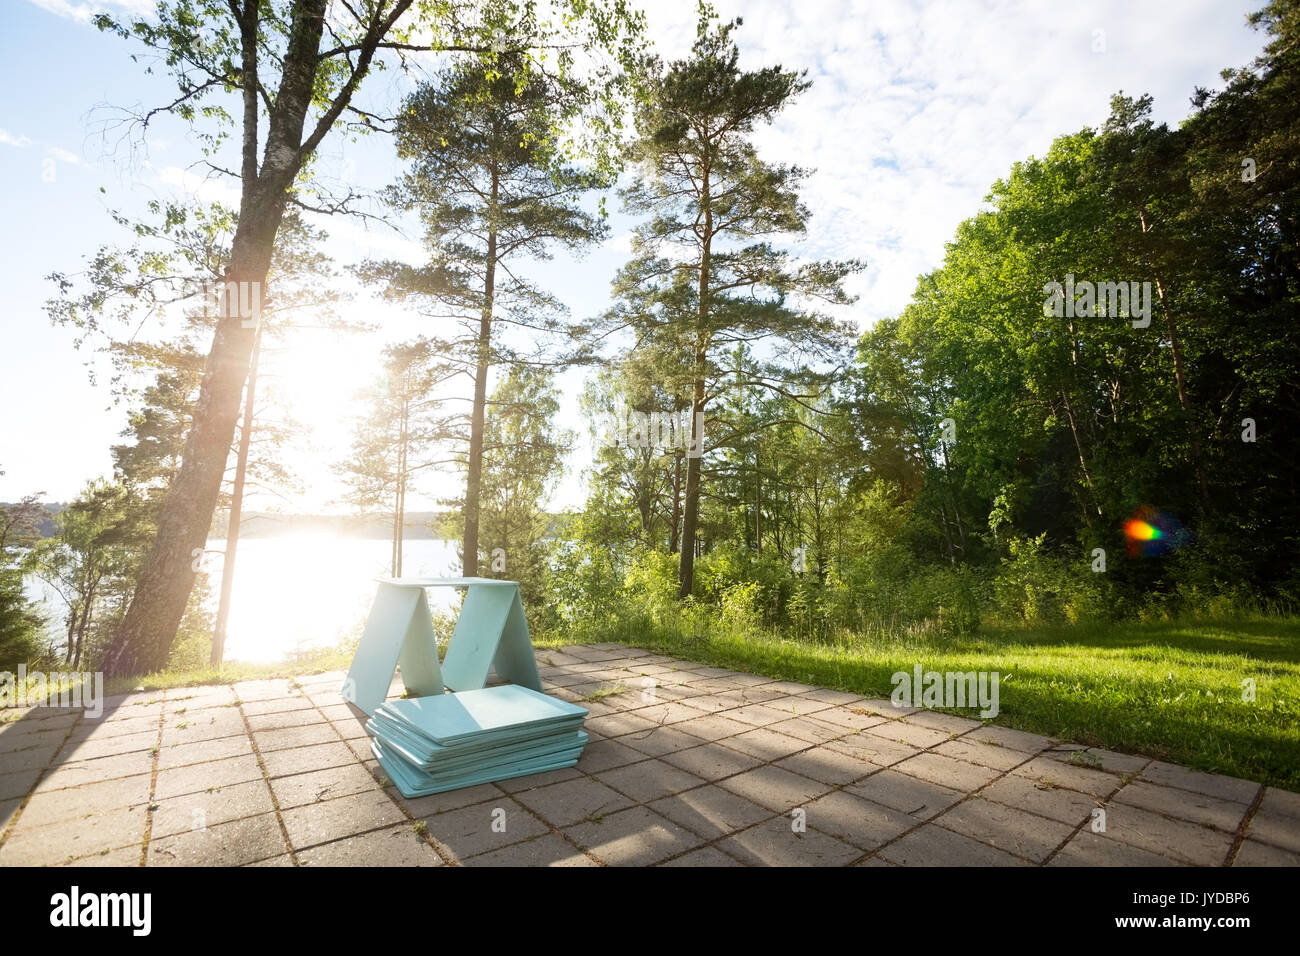 Wooden Planks On Patio In Forest During Sunny Day Stock Photo